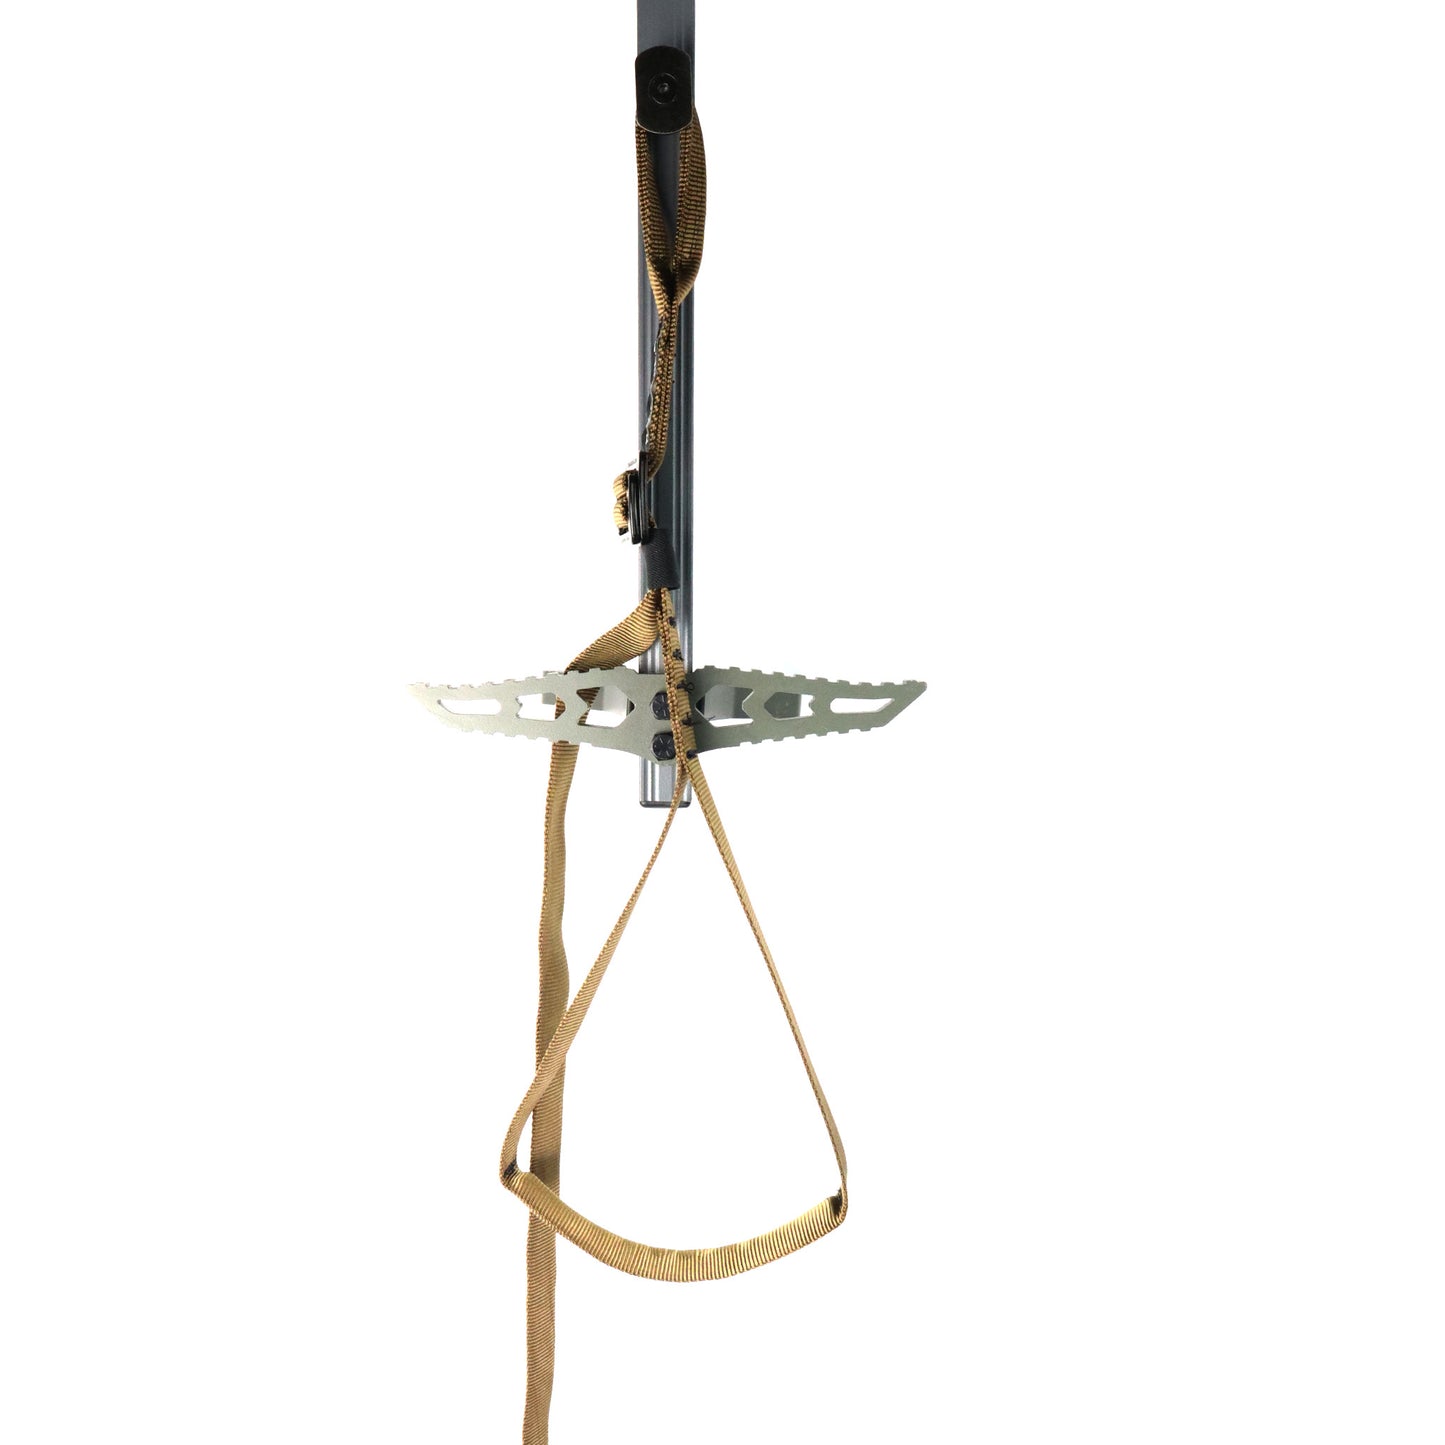 Adjusted Moveable/Adjustable Sewn Climbing Stick Aider